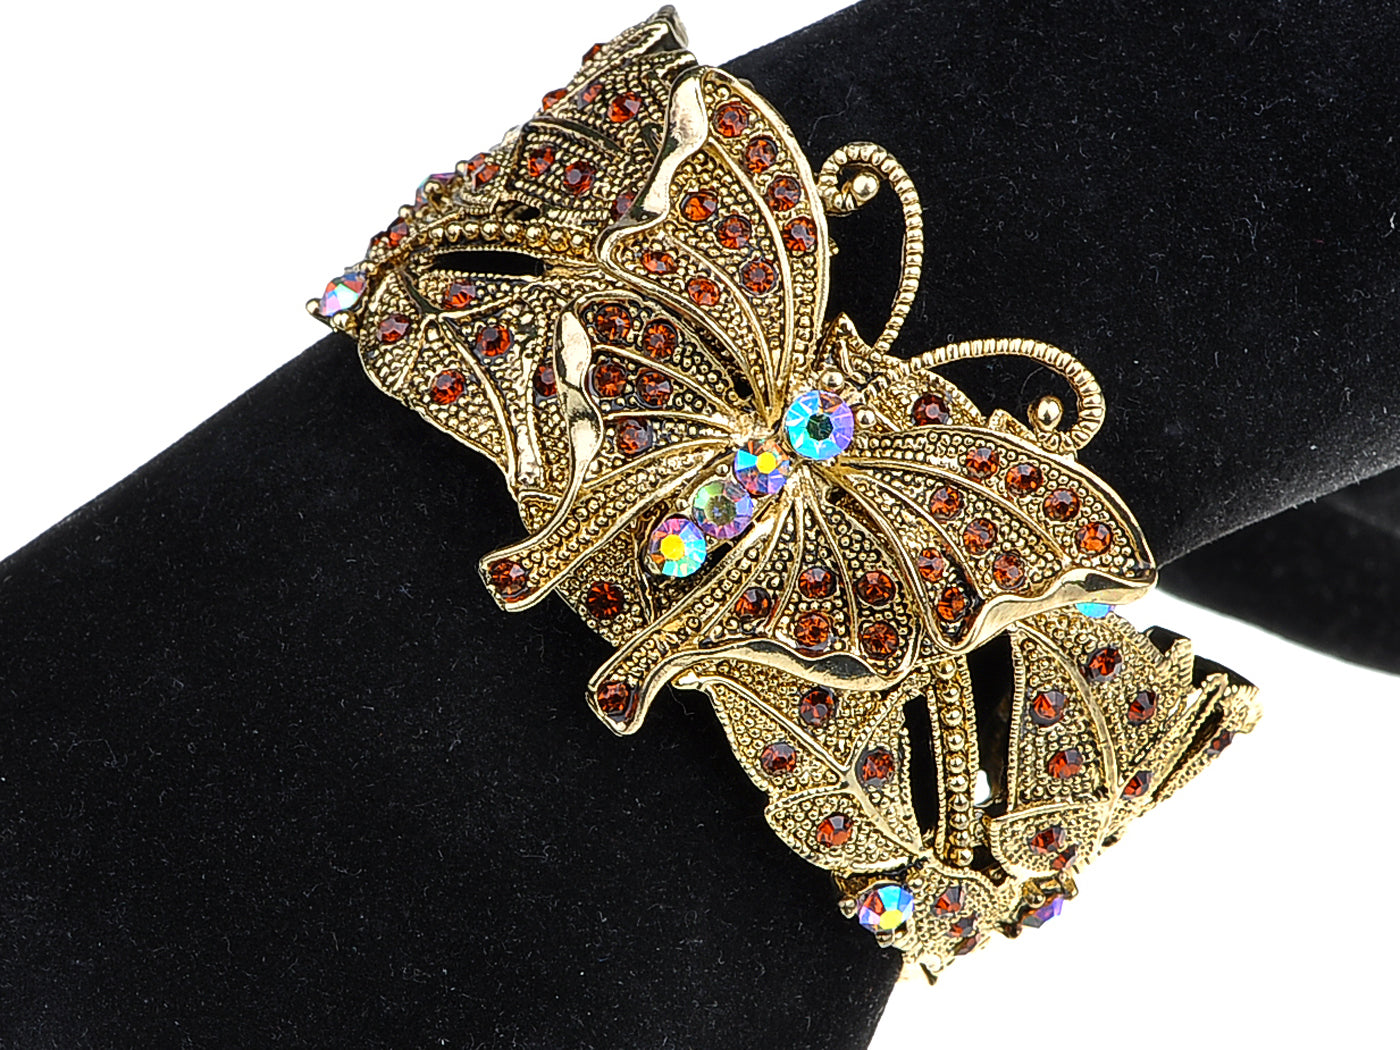 Topaz Iridescent Color Swallowtail Butterfly Insect Cuff Bangle Bracelet